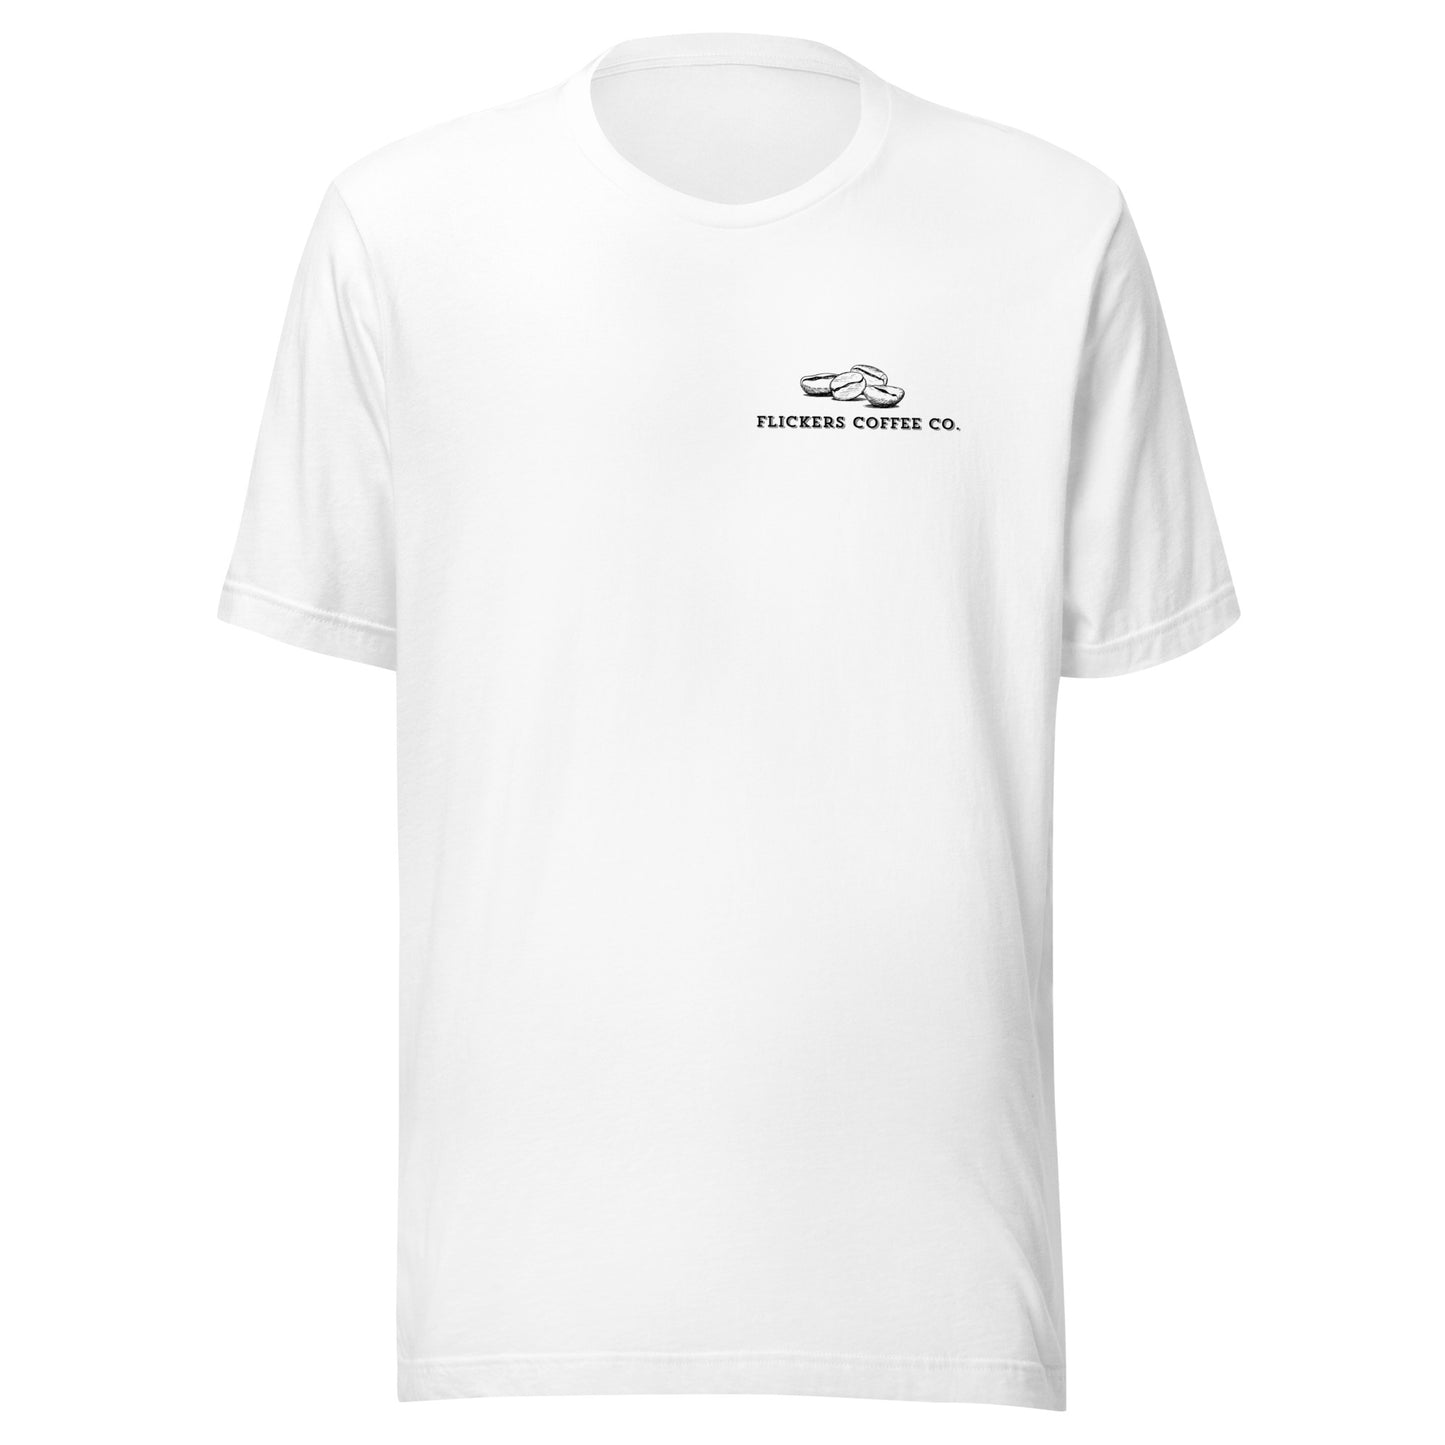 Bean Flickers Coffee Co Unisex t-shirt